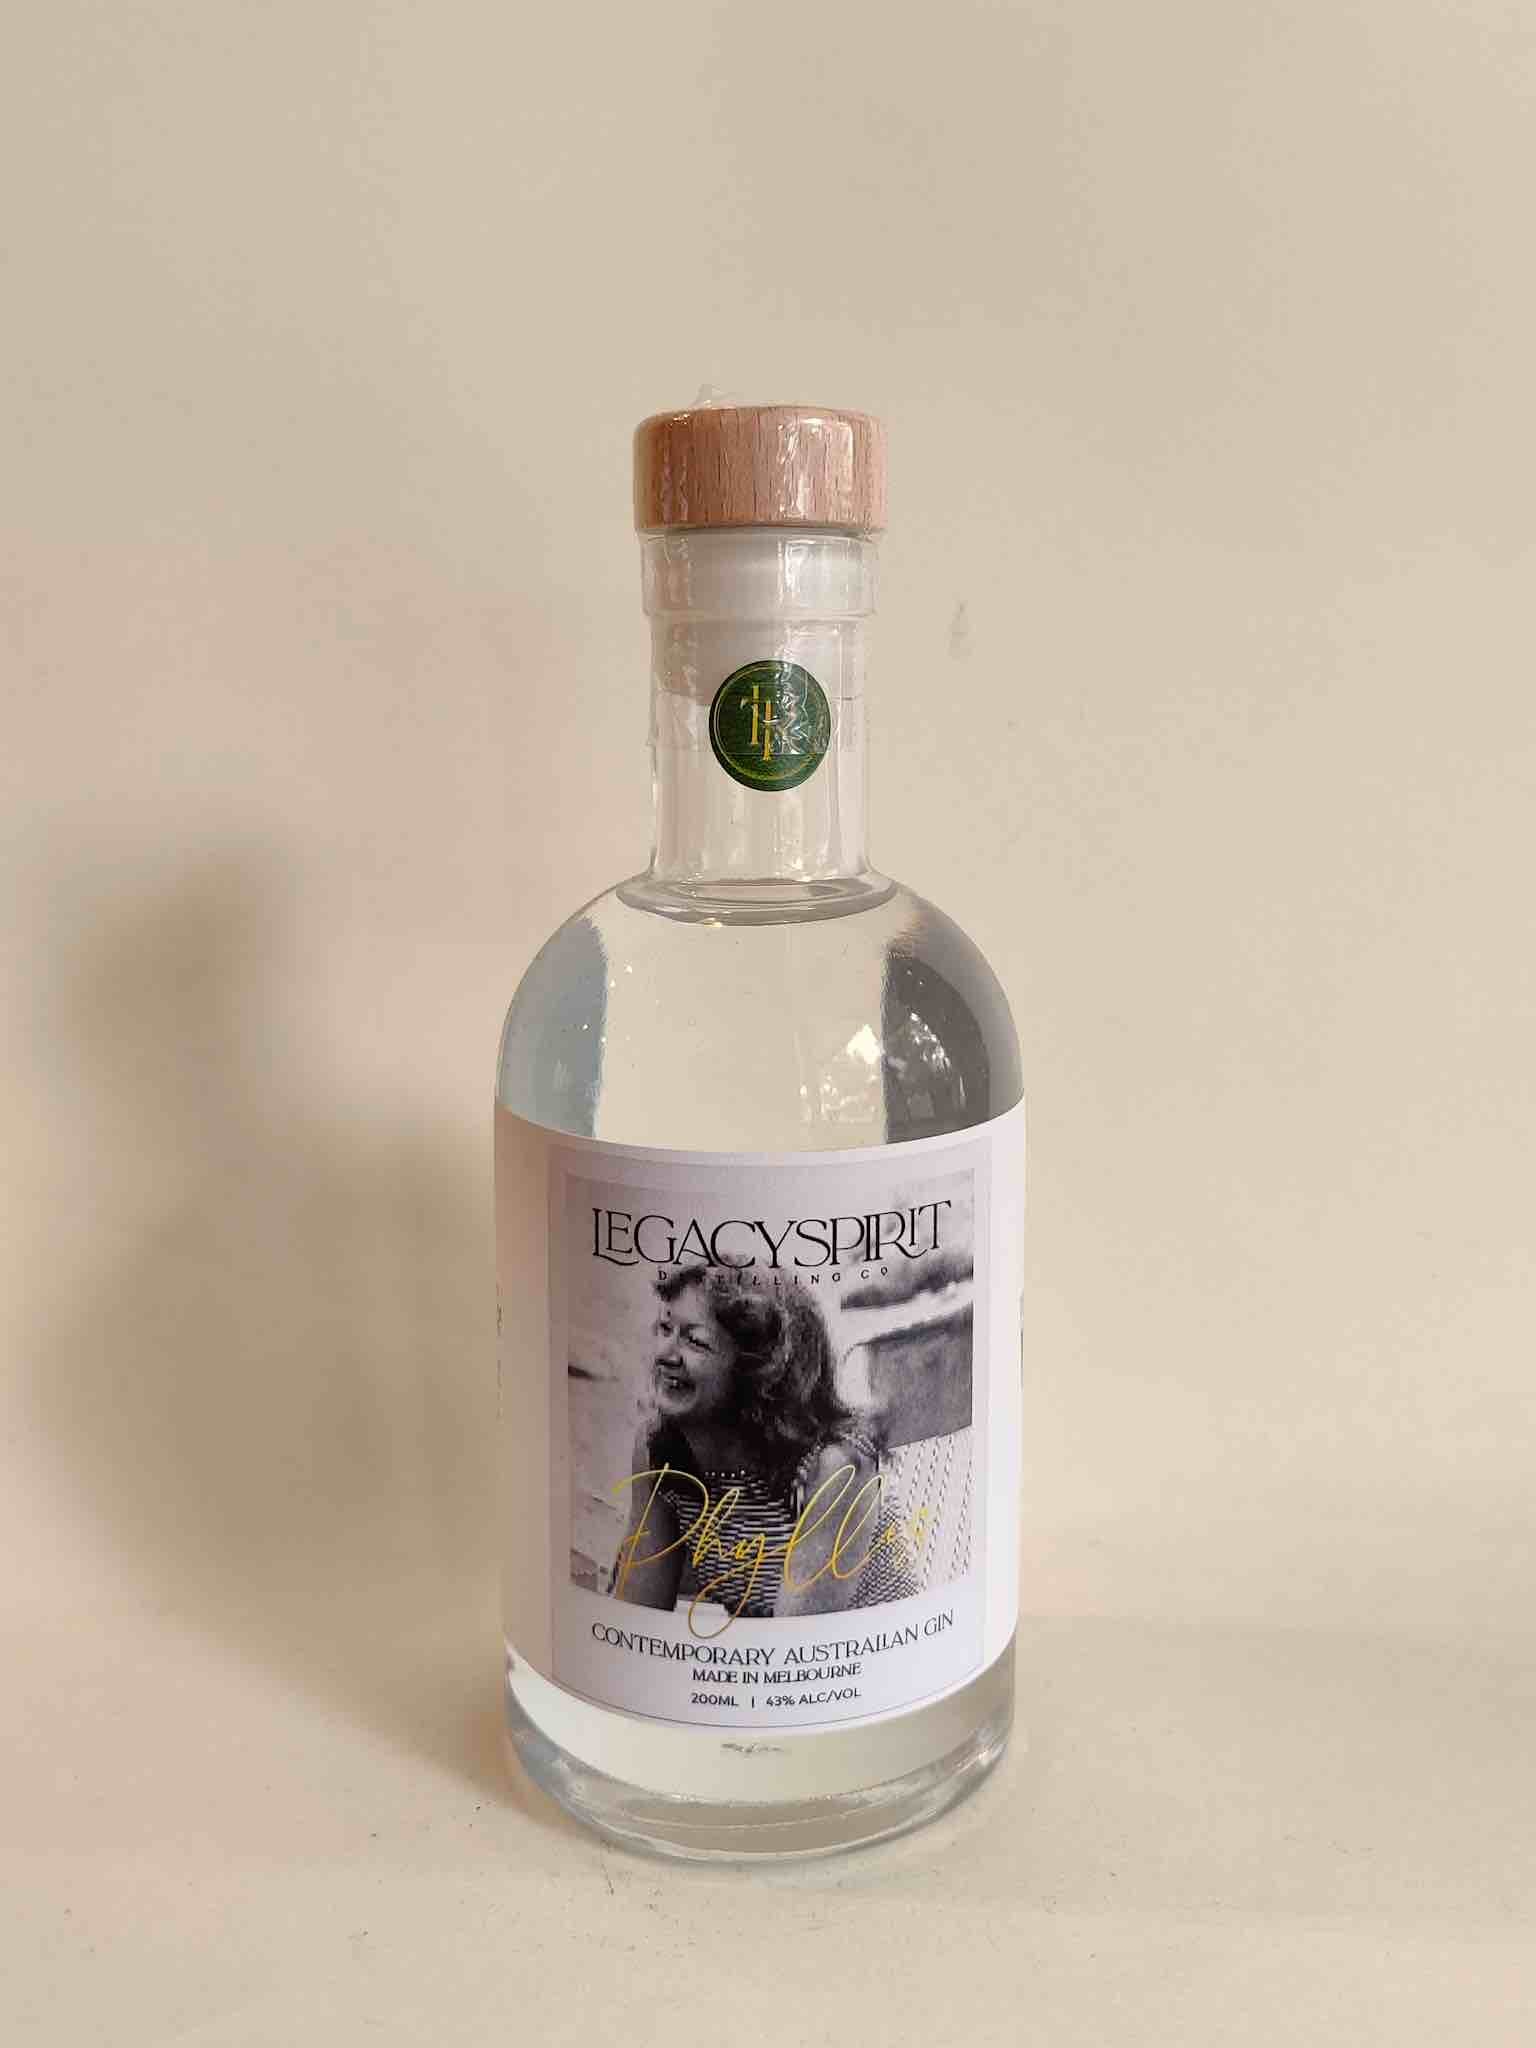 A 200ml bootle of Legacy Spirit Phyllis Gin.